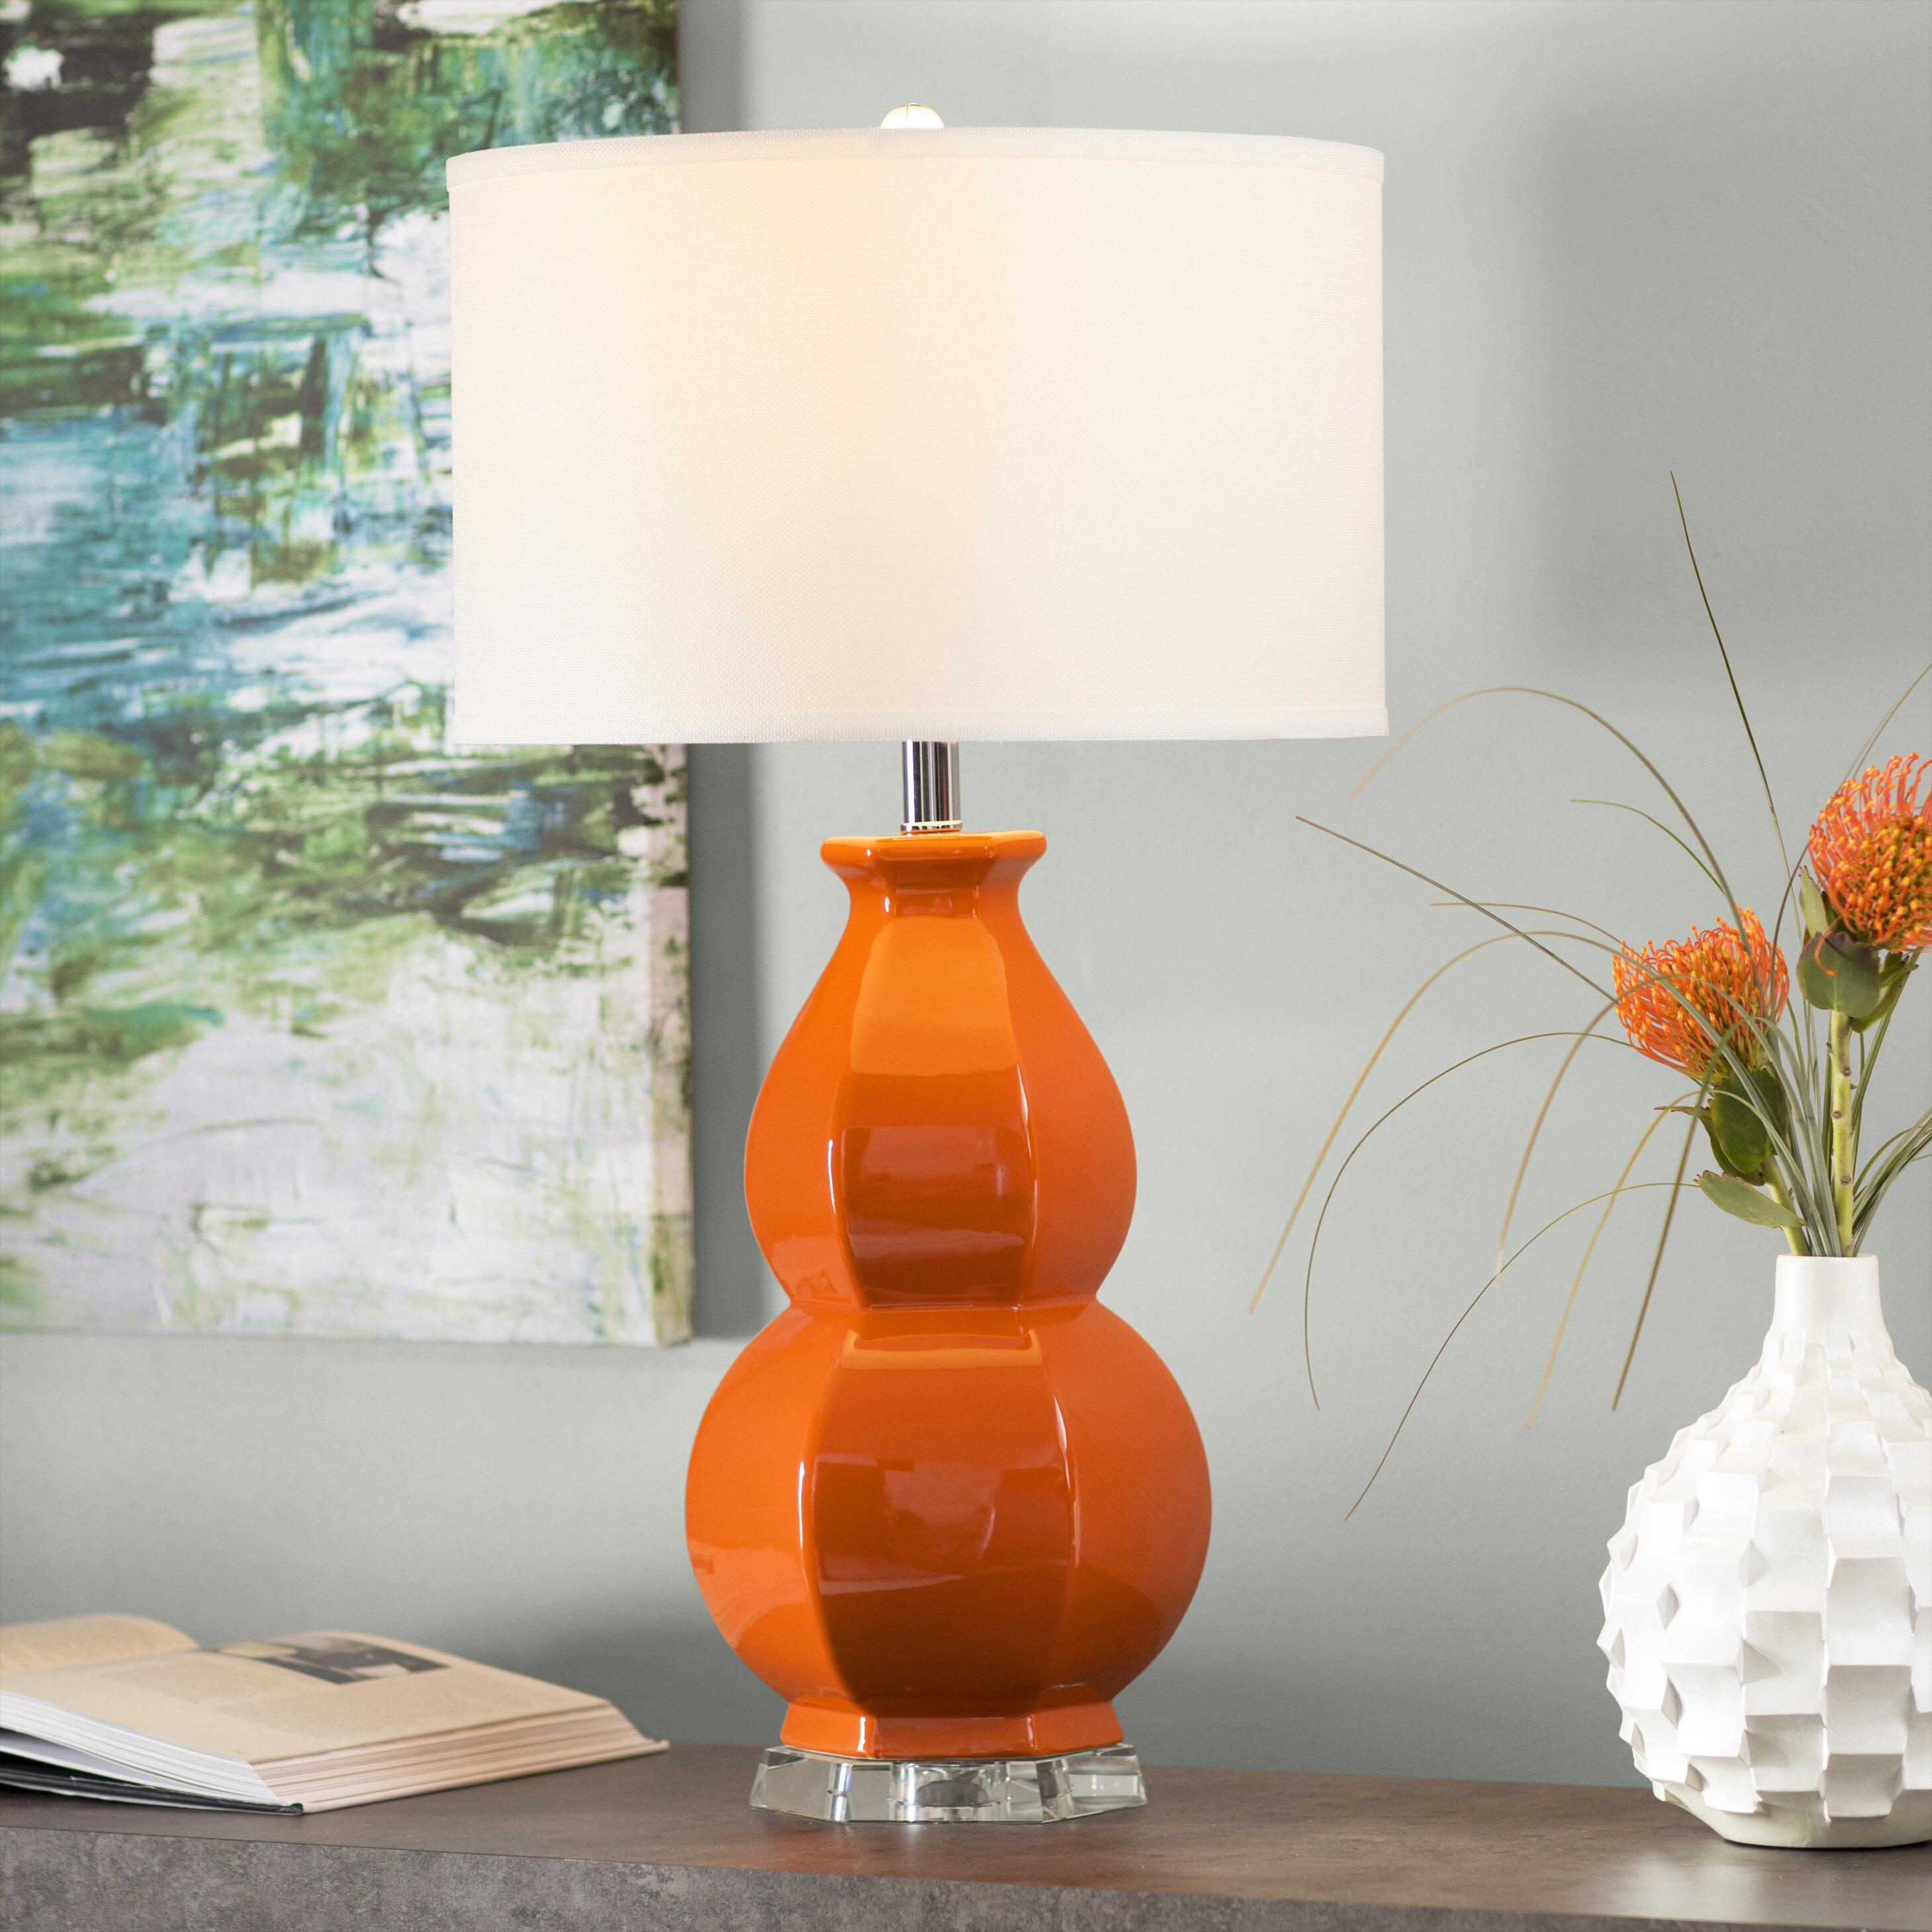 RED & ORANGE GLASS BALL TABLE LAMP – Next Time Around